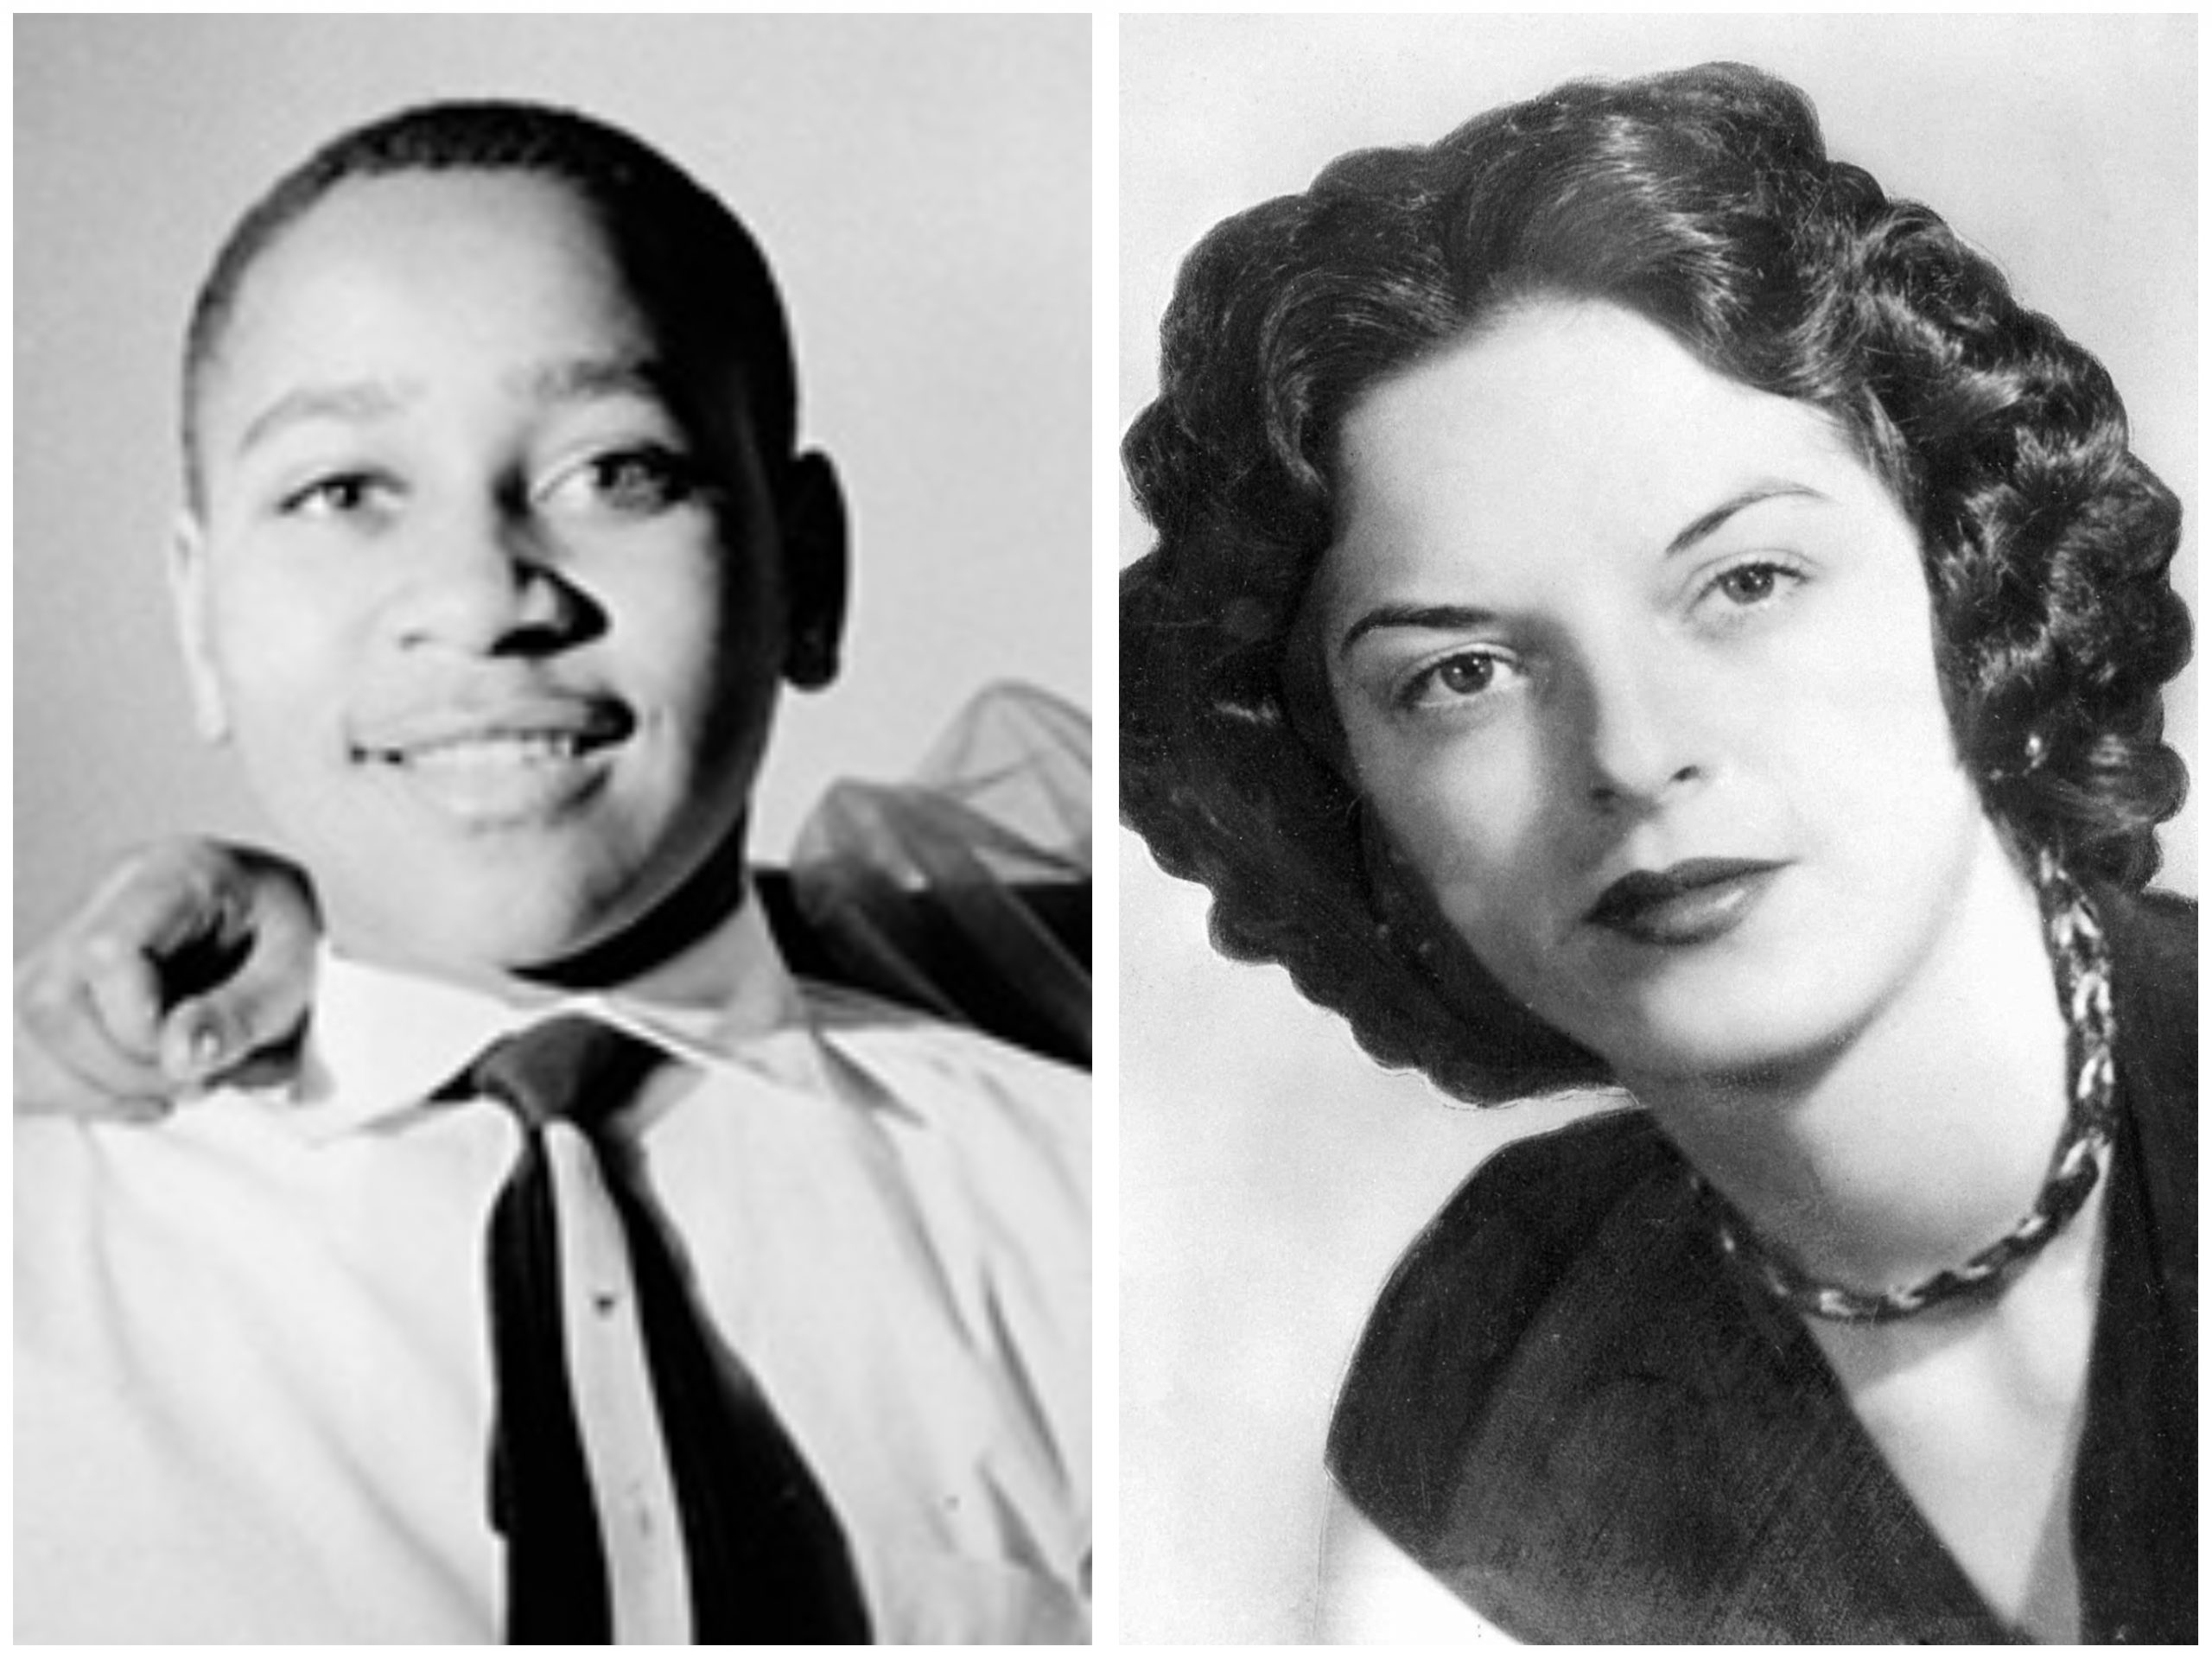 Warrant For Woman Who Accused Emmett Till Found 67 Years Later, Family Demands Arrest